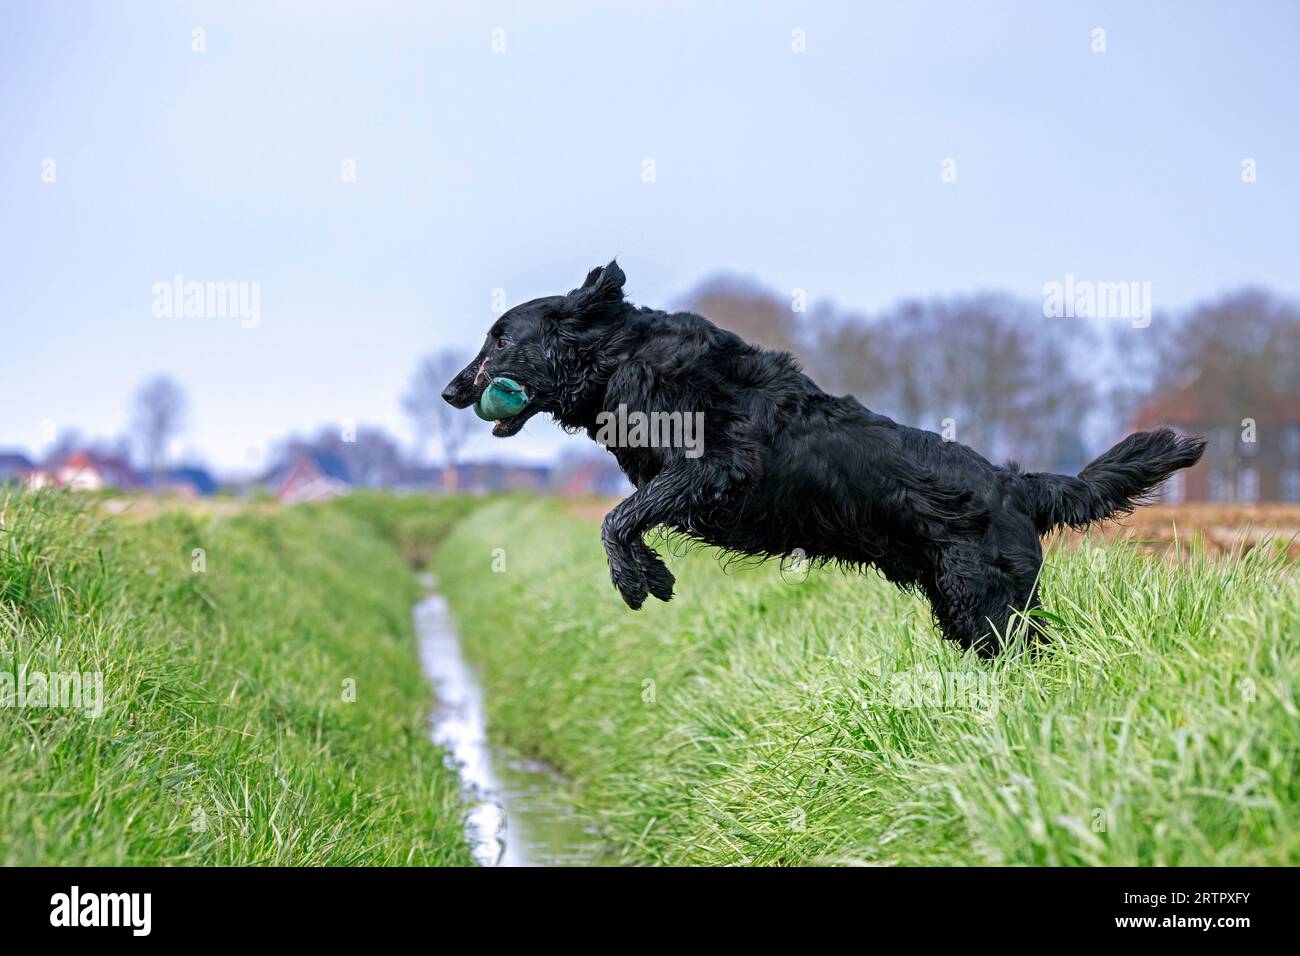 Black flat-coated retriever, gundog / hunting dog breed originating from England, jumping over ditch in field with training dummy in mouth / muzzle Stock Photo